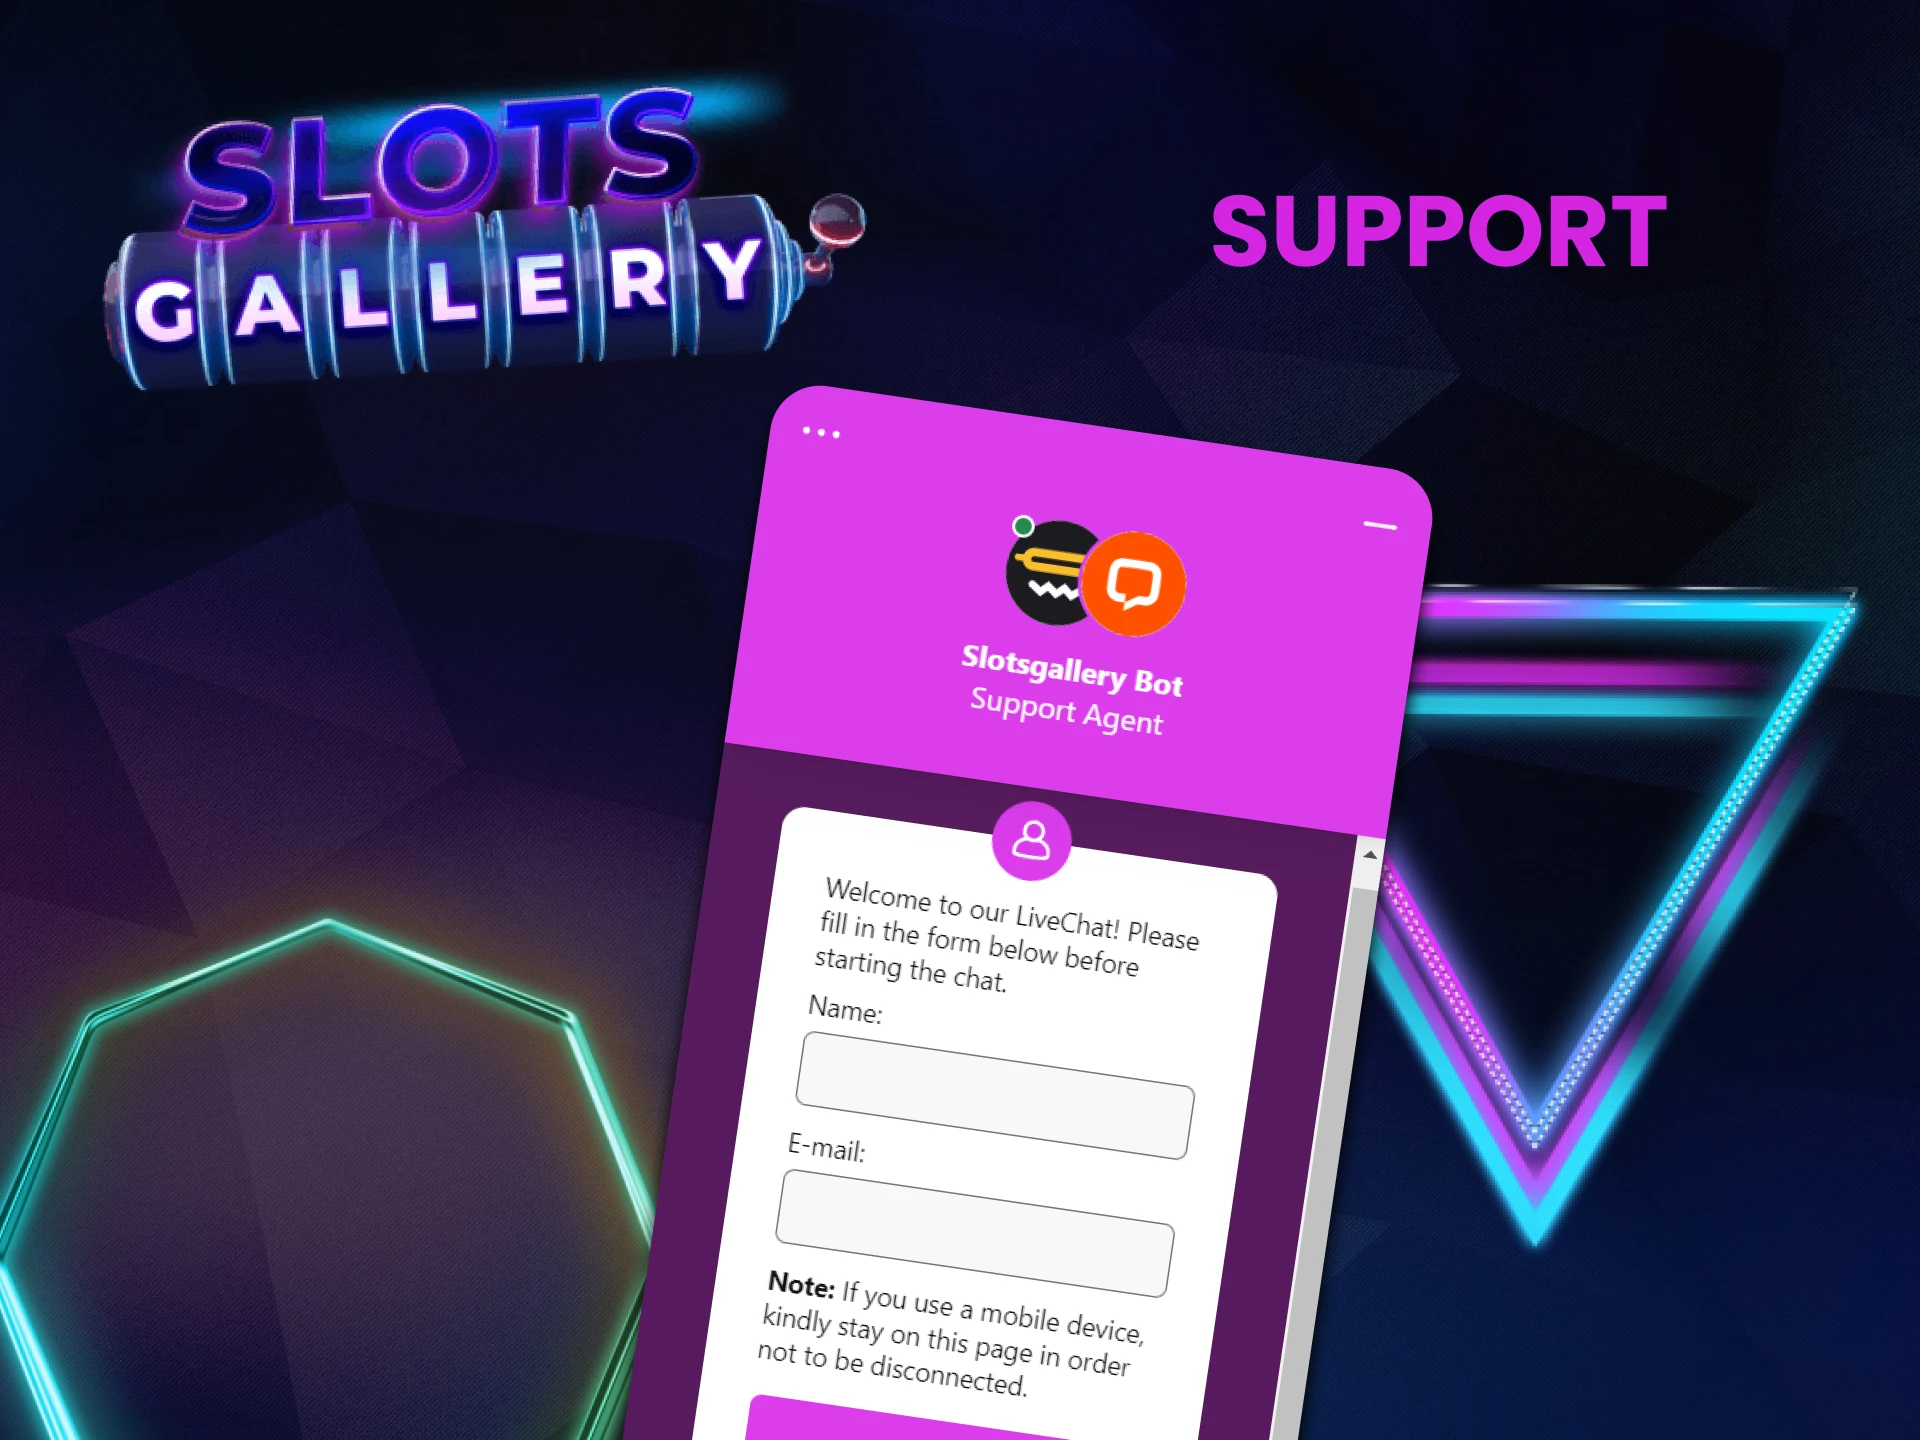 We will tell you how to contact the Slots Gallery team.